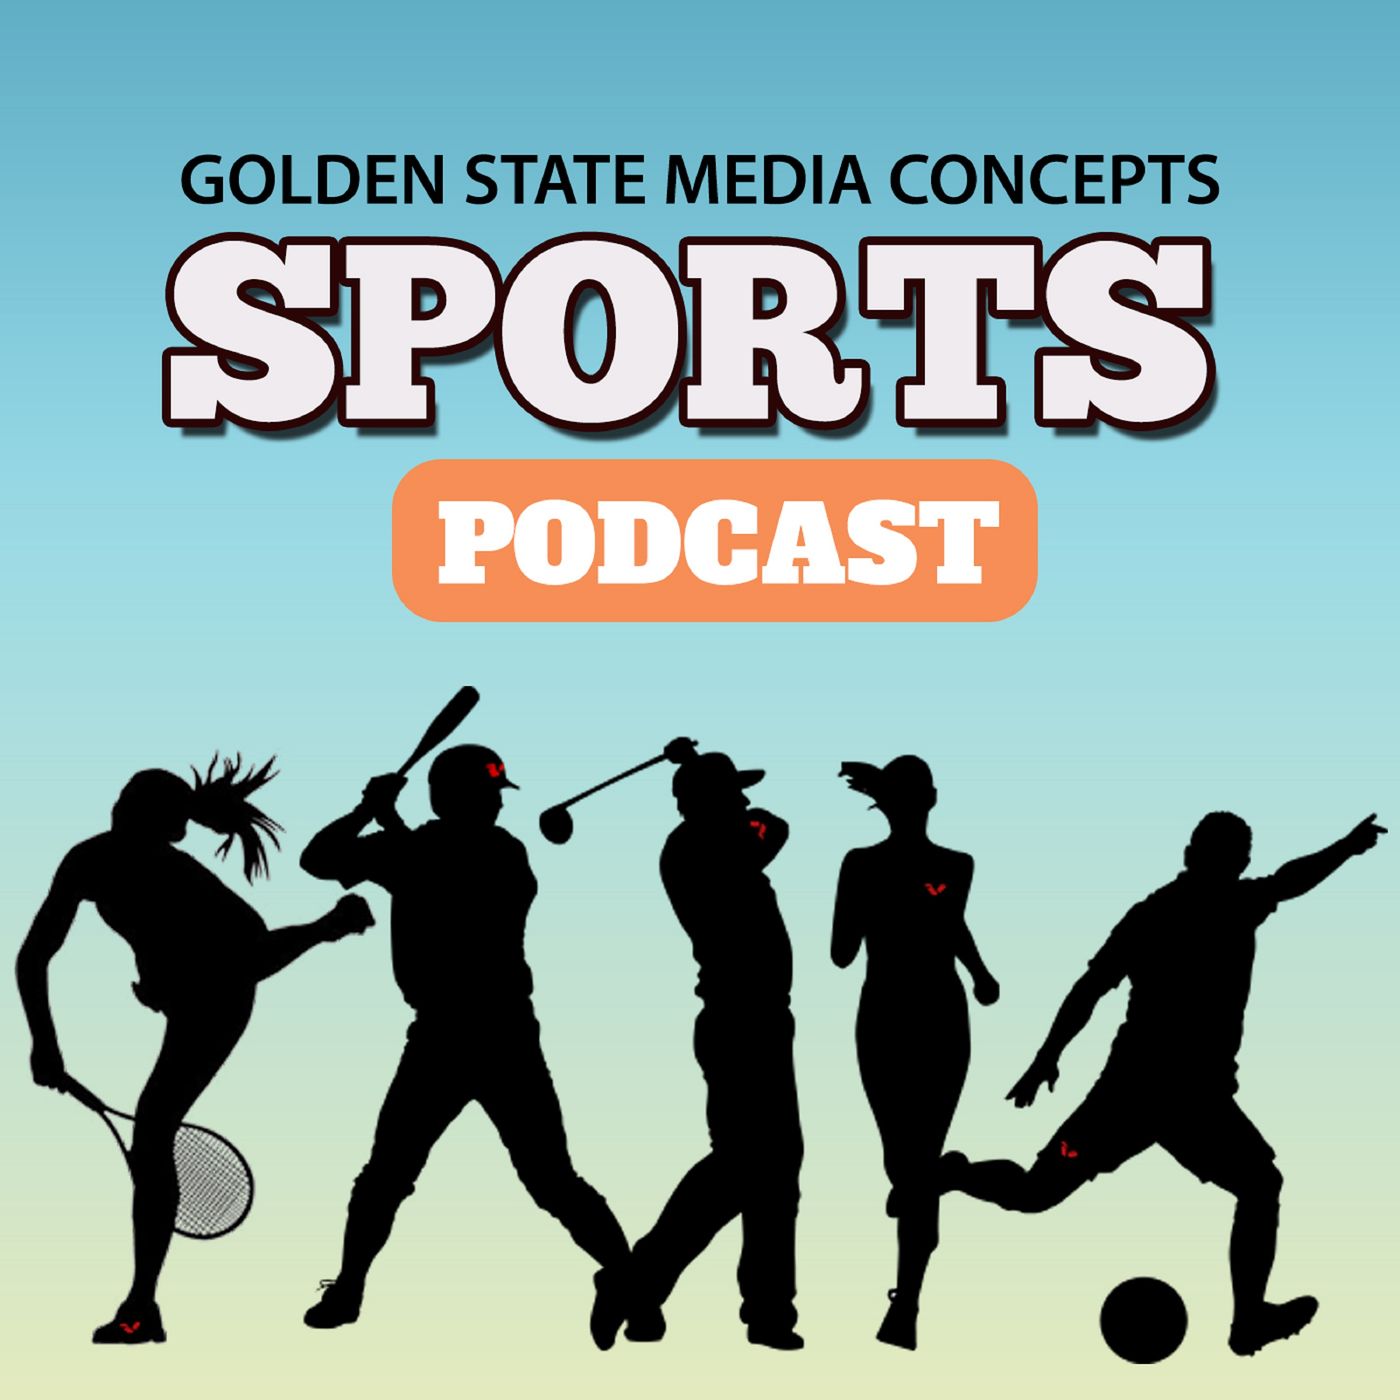 Jared Goff's Contract Extension, NBA Playoff Reactions & Lottery Results | GSMC Sports Podcast